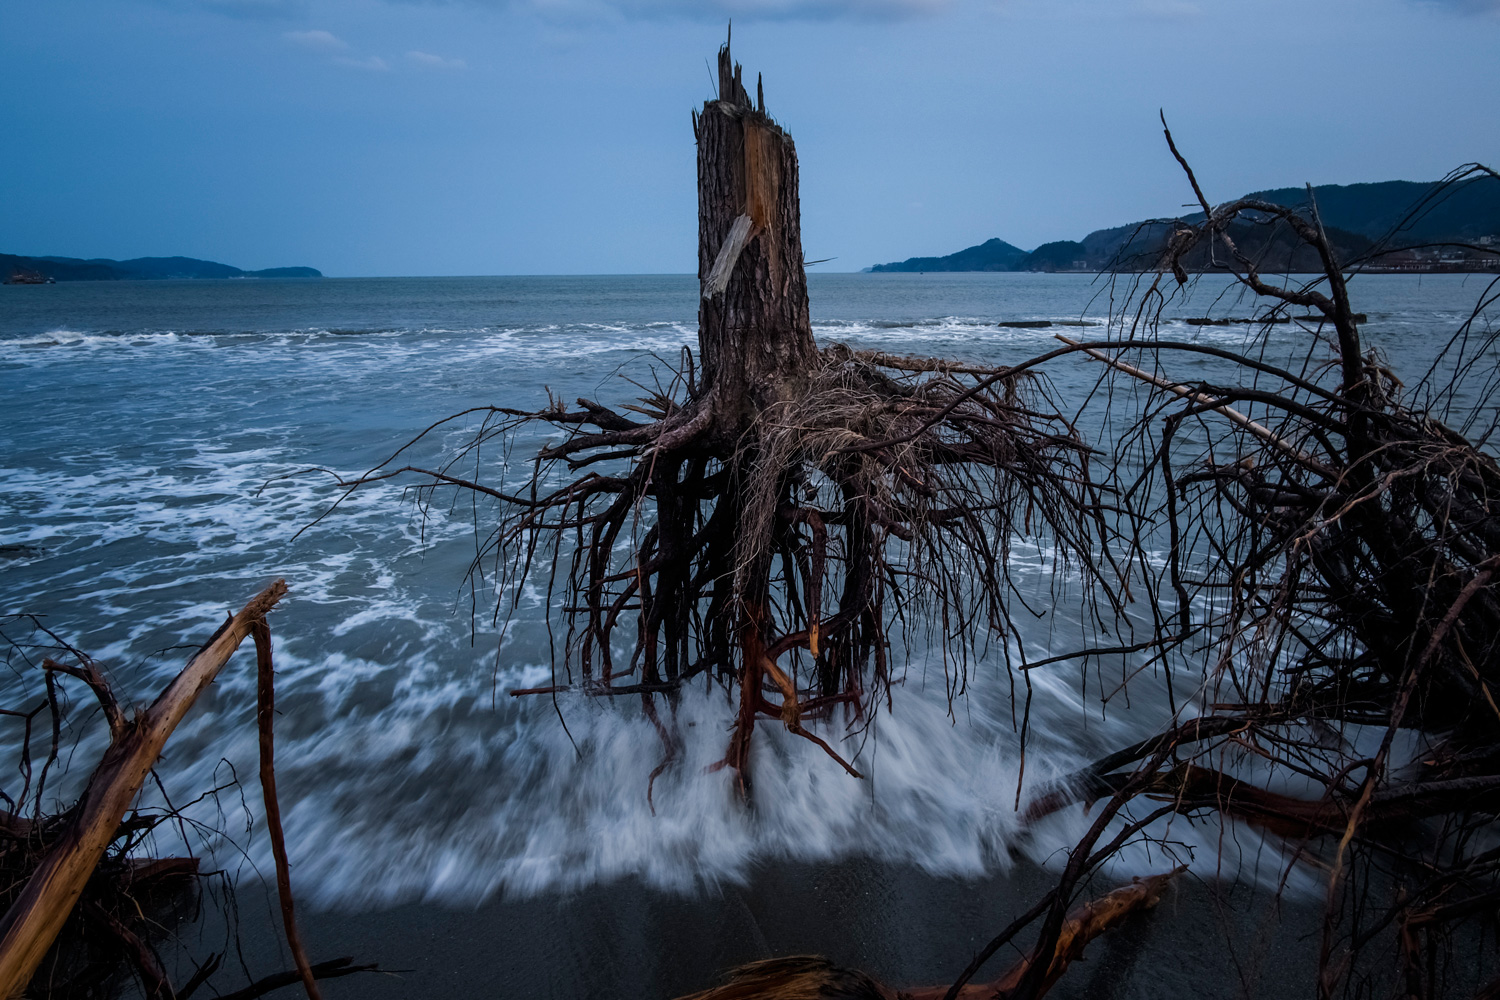 March 7, 2012.  Pine trees, uprooted during last year's tsunami, lay strewn over the beach in Rikuzentakata, Japan.